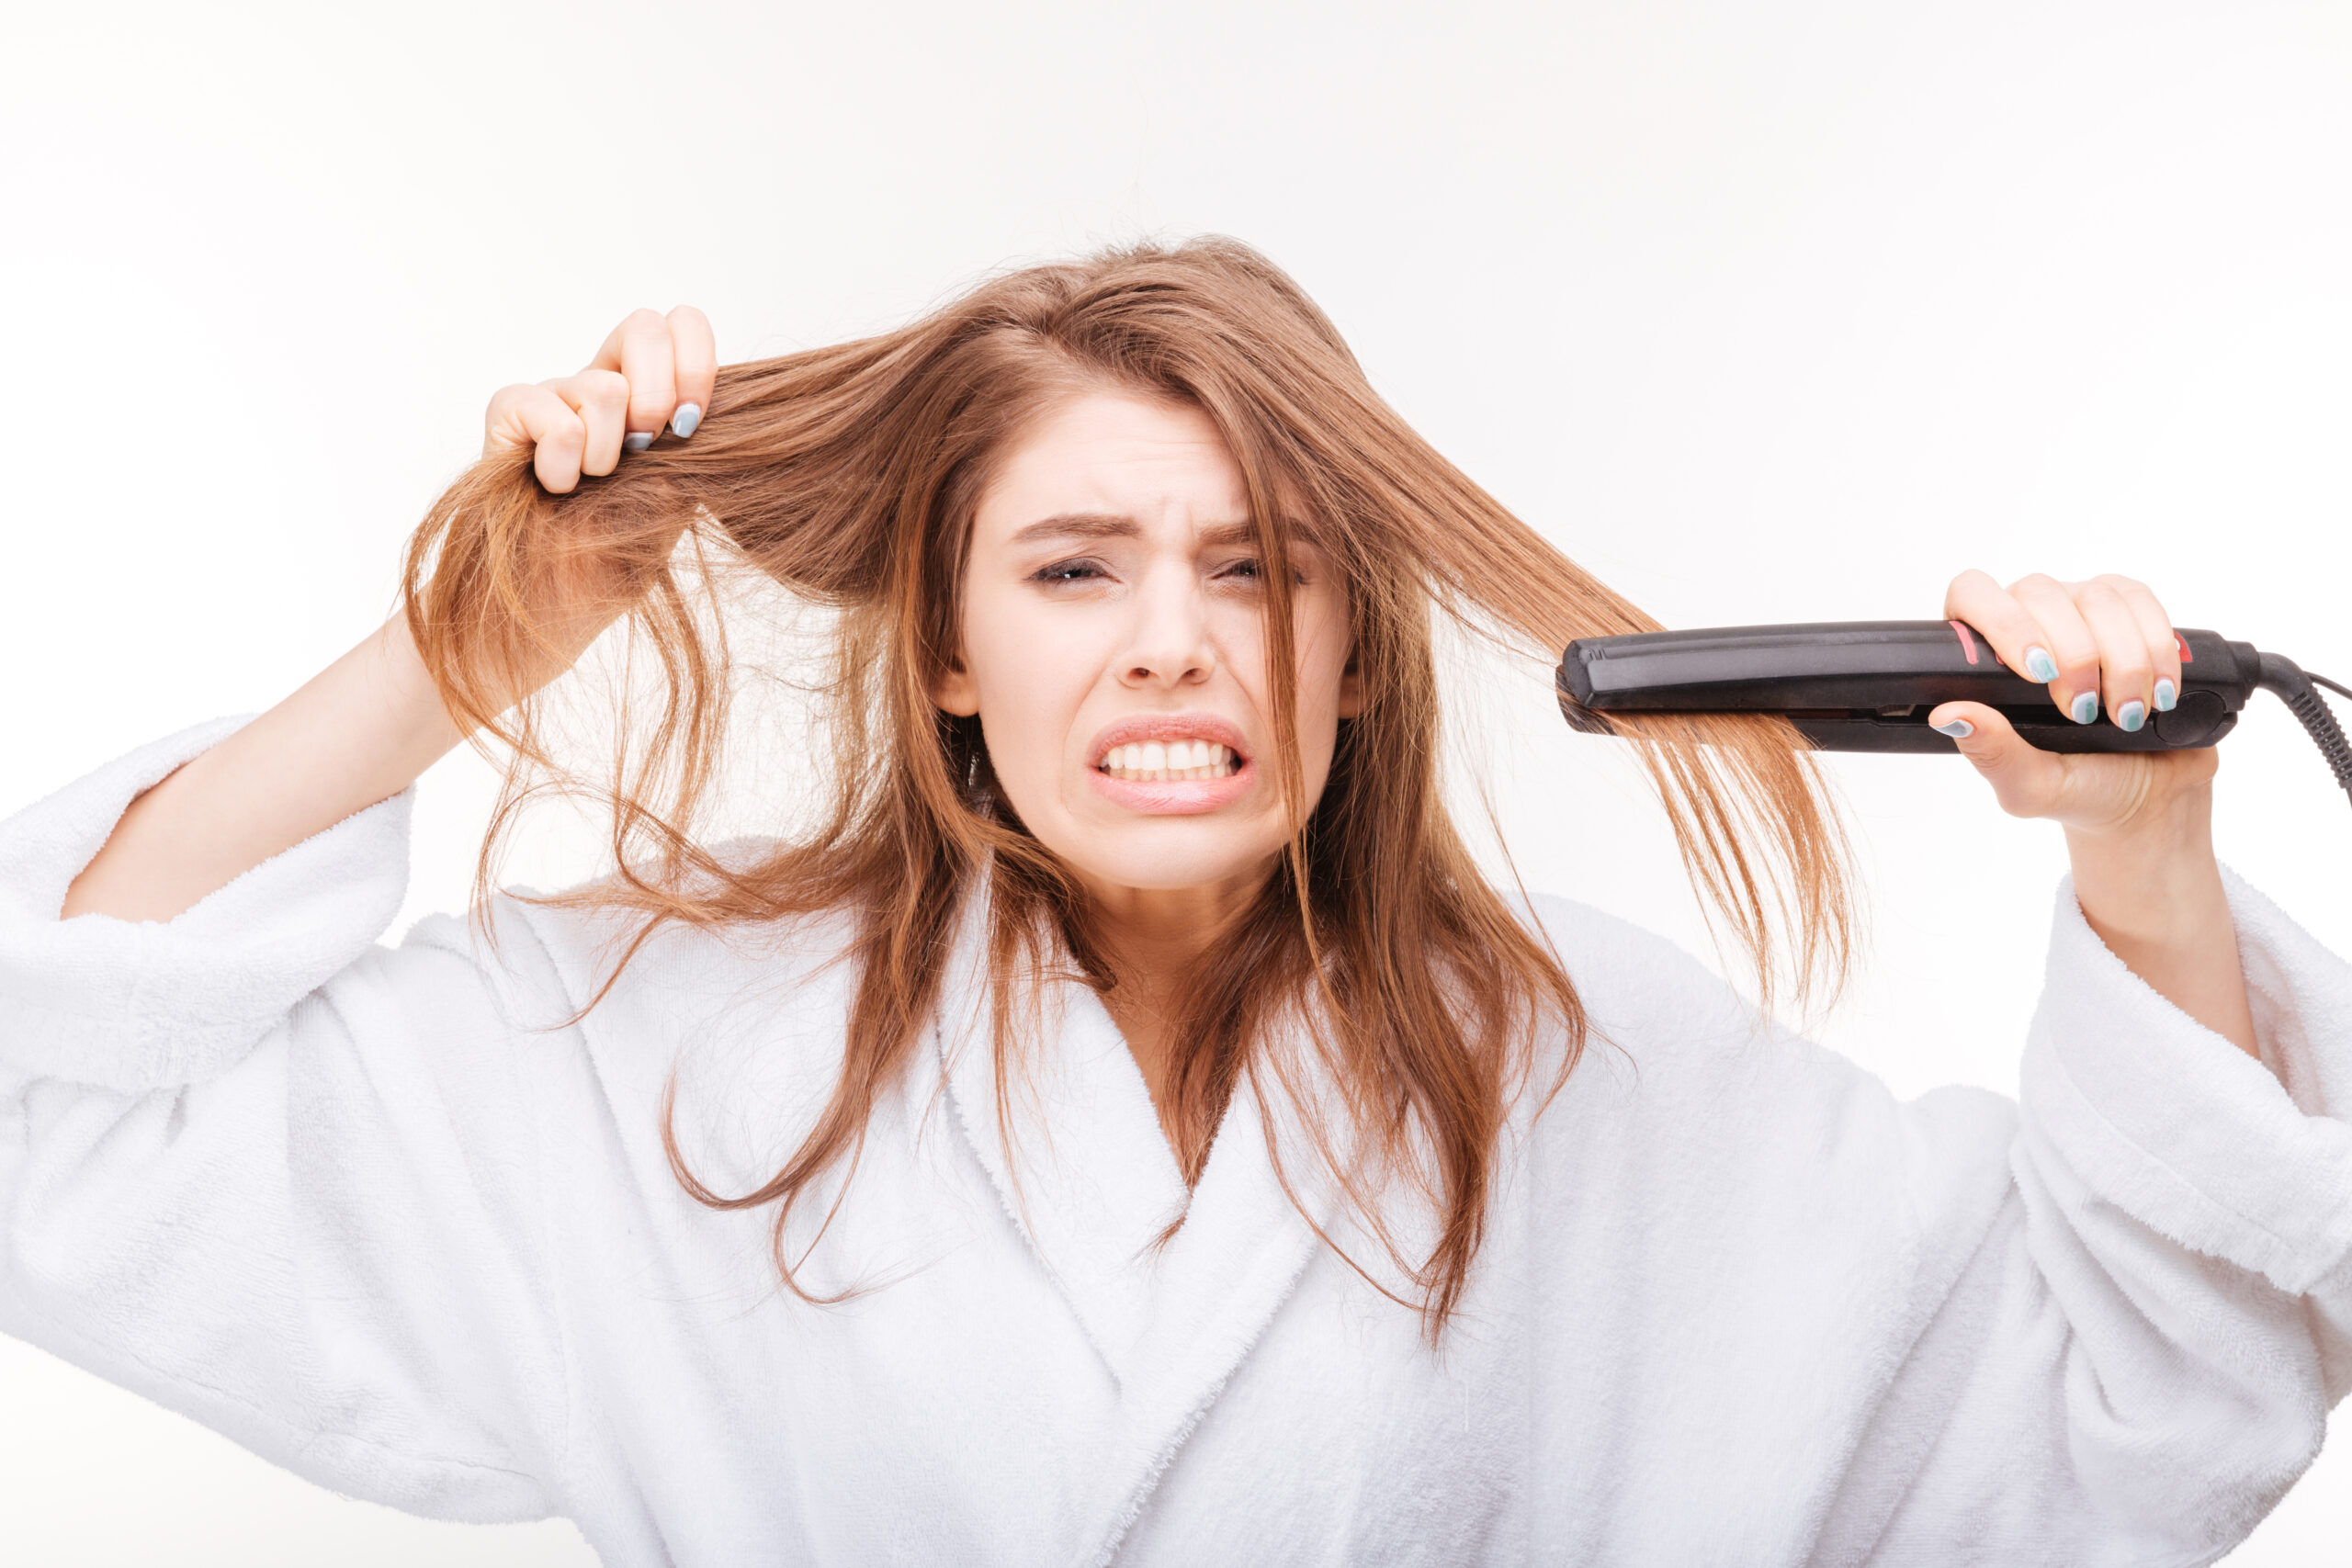 Learn to prevent hair damage from flat irons